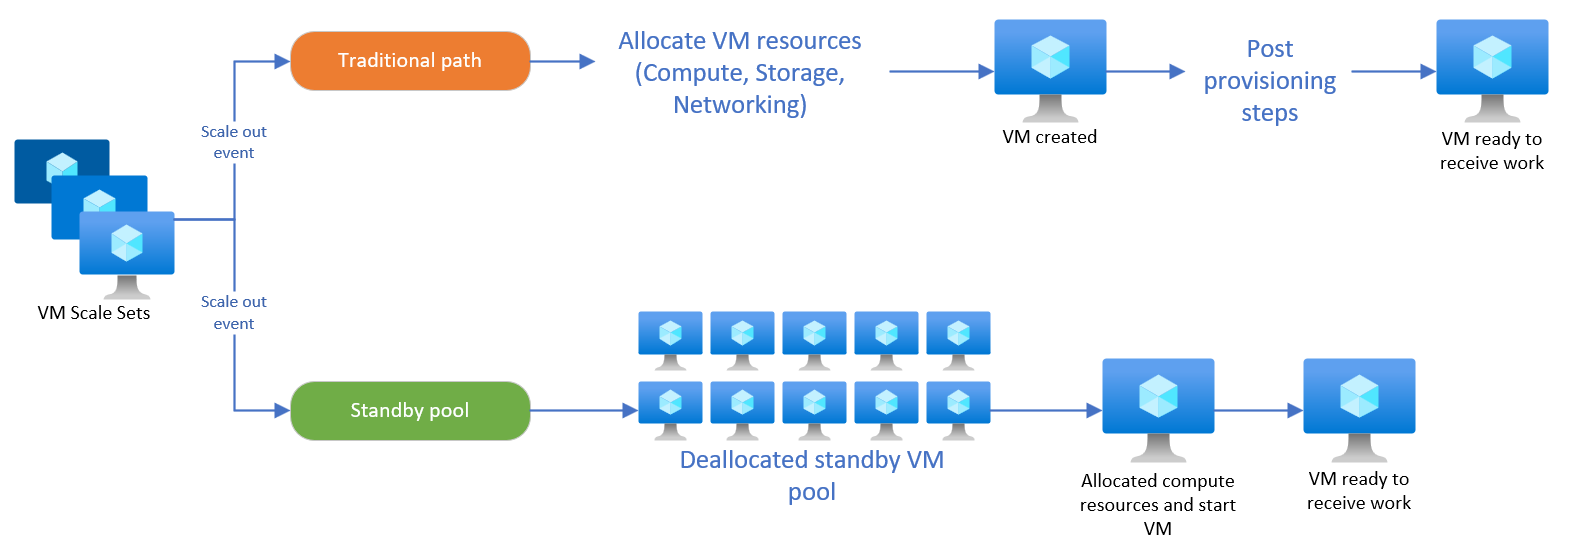 A screenshot showing the workflow when using deallocated virtual machine pools.